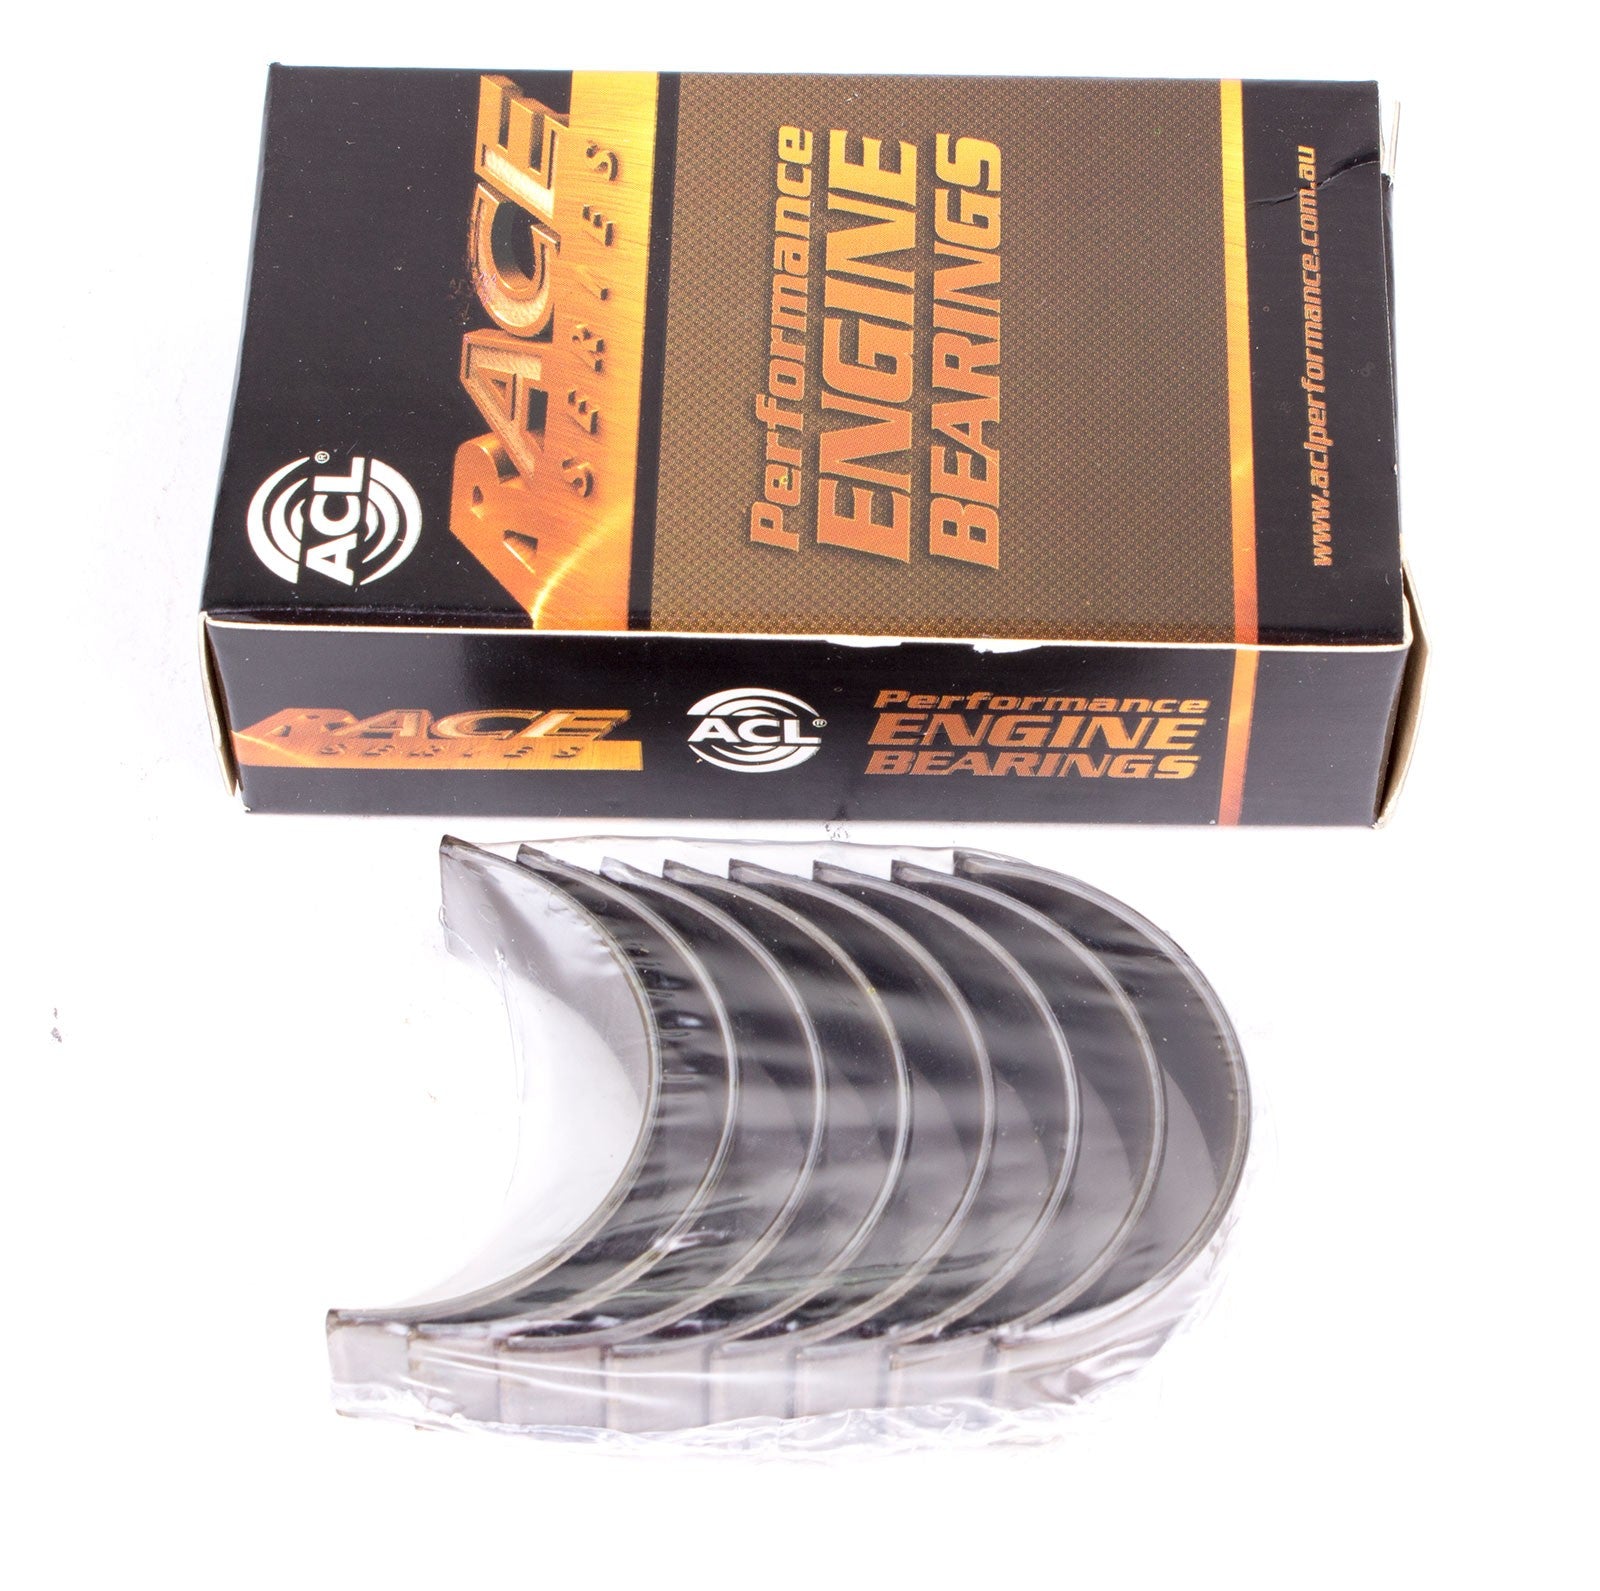 ACL 7M2092H-010 Main bearing set (ACL Race Series) Photo-0 